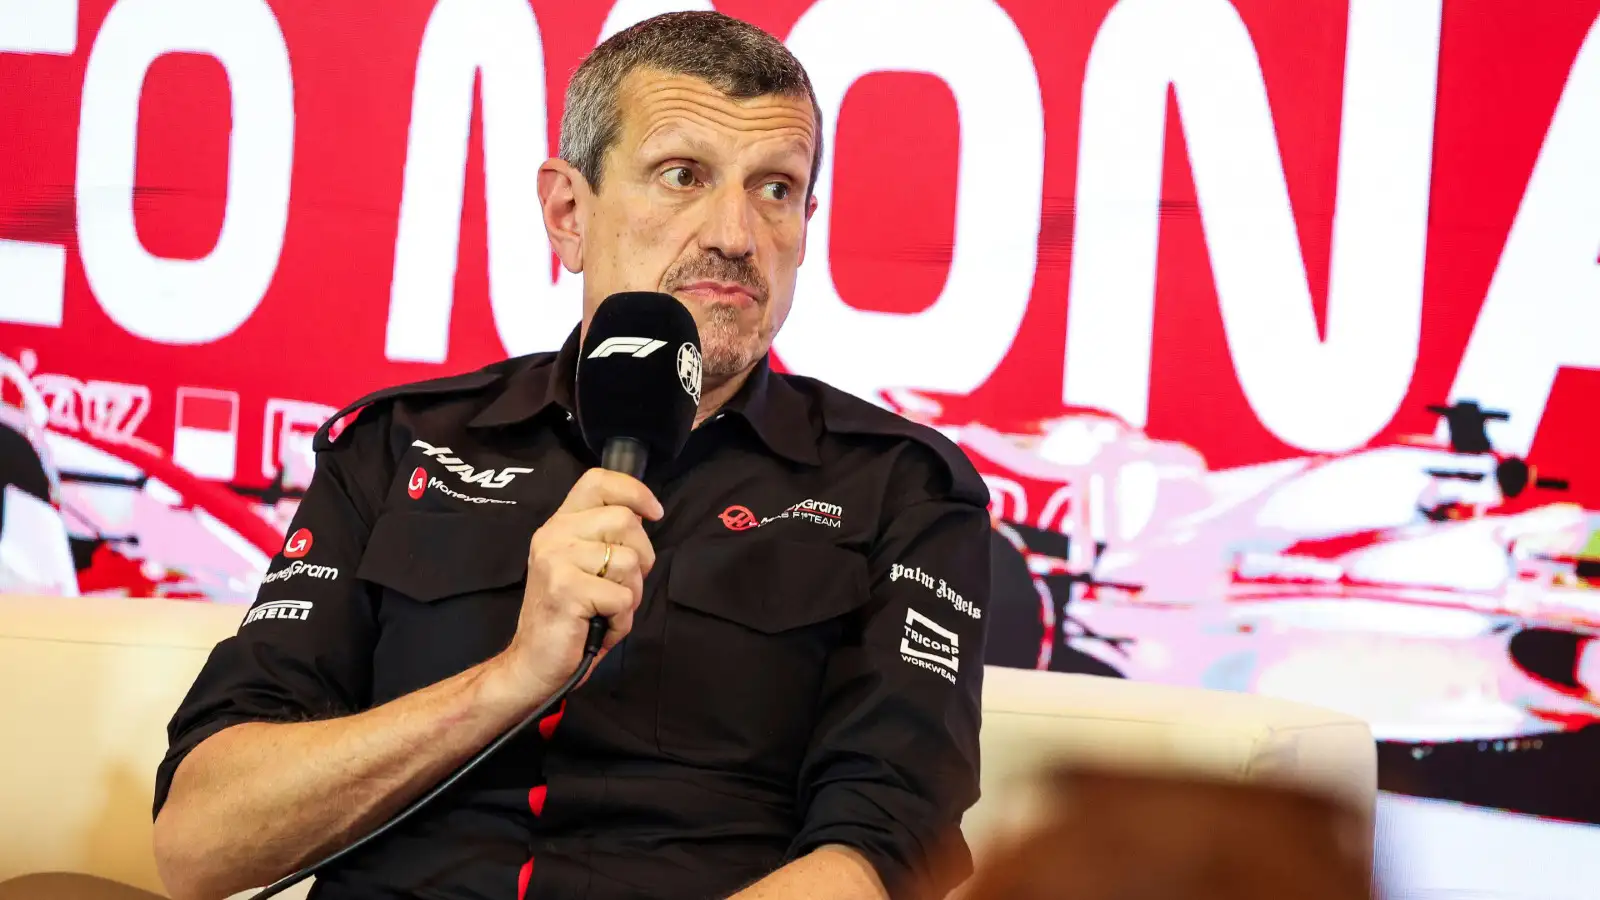 Haas team boss Guenther Steiner at the Monaco Grand Prix press conference. Monte Carlo, May 2023.